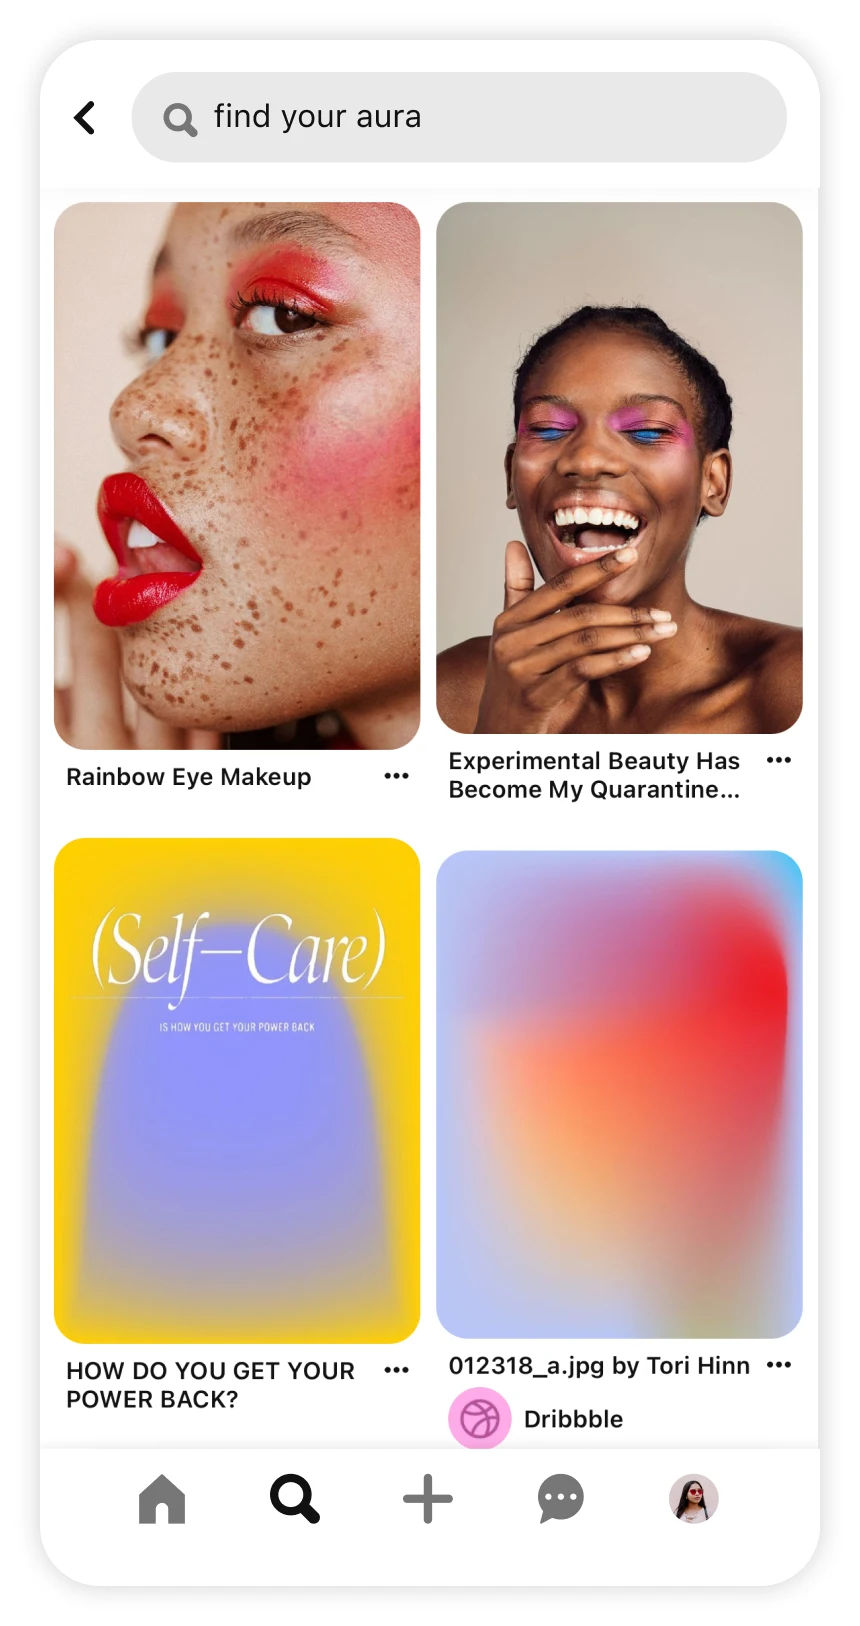 Screen shot of Pinterest app showing trend article for aura aesthetic